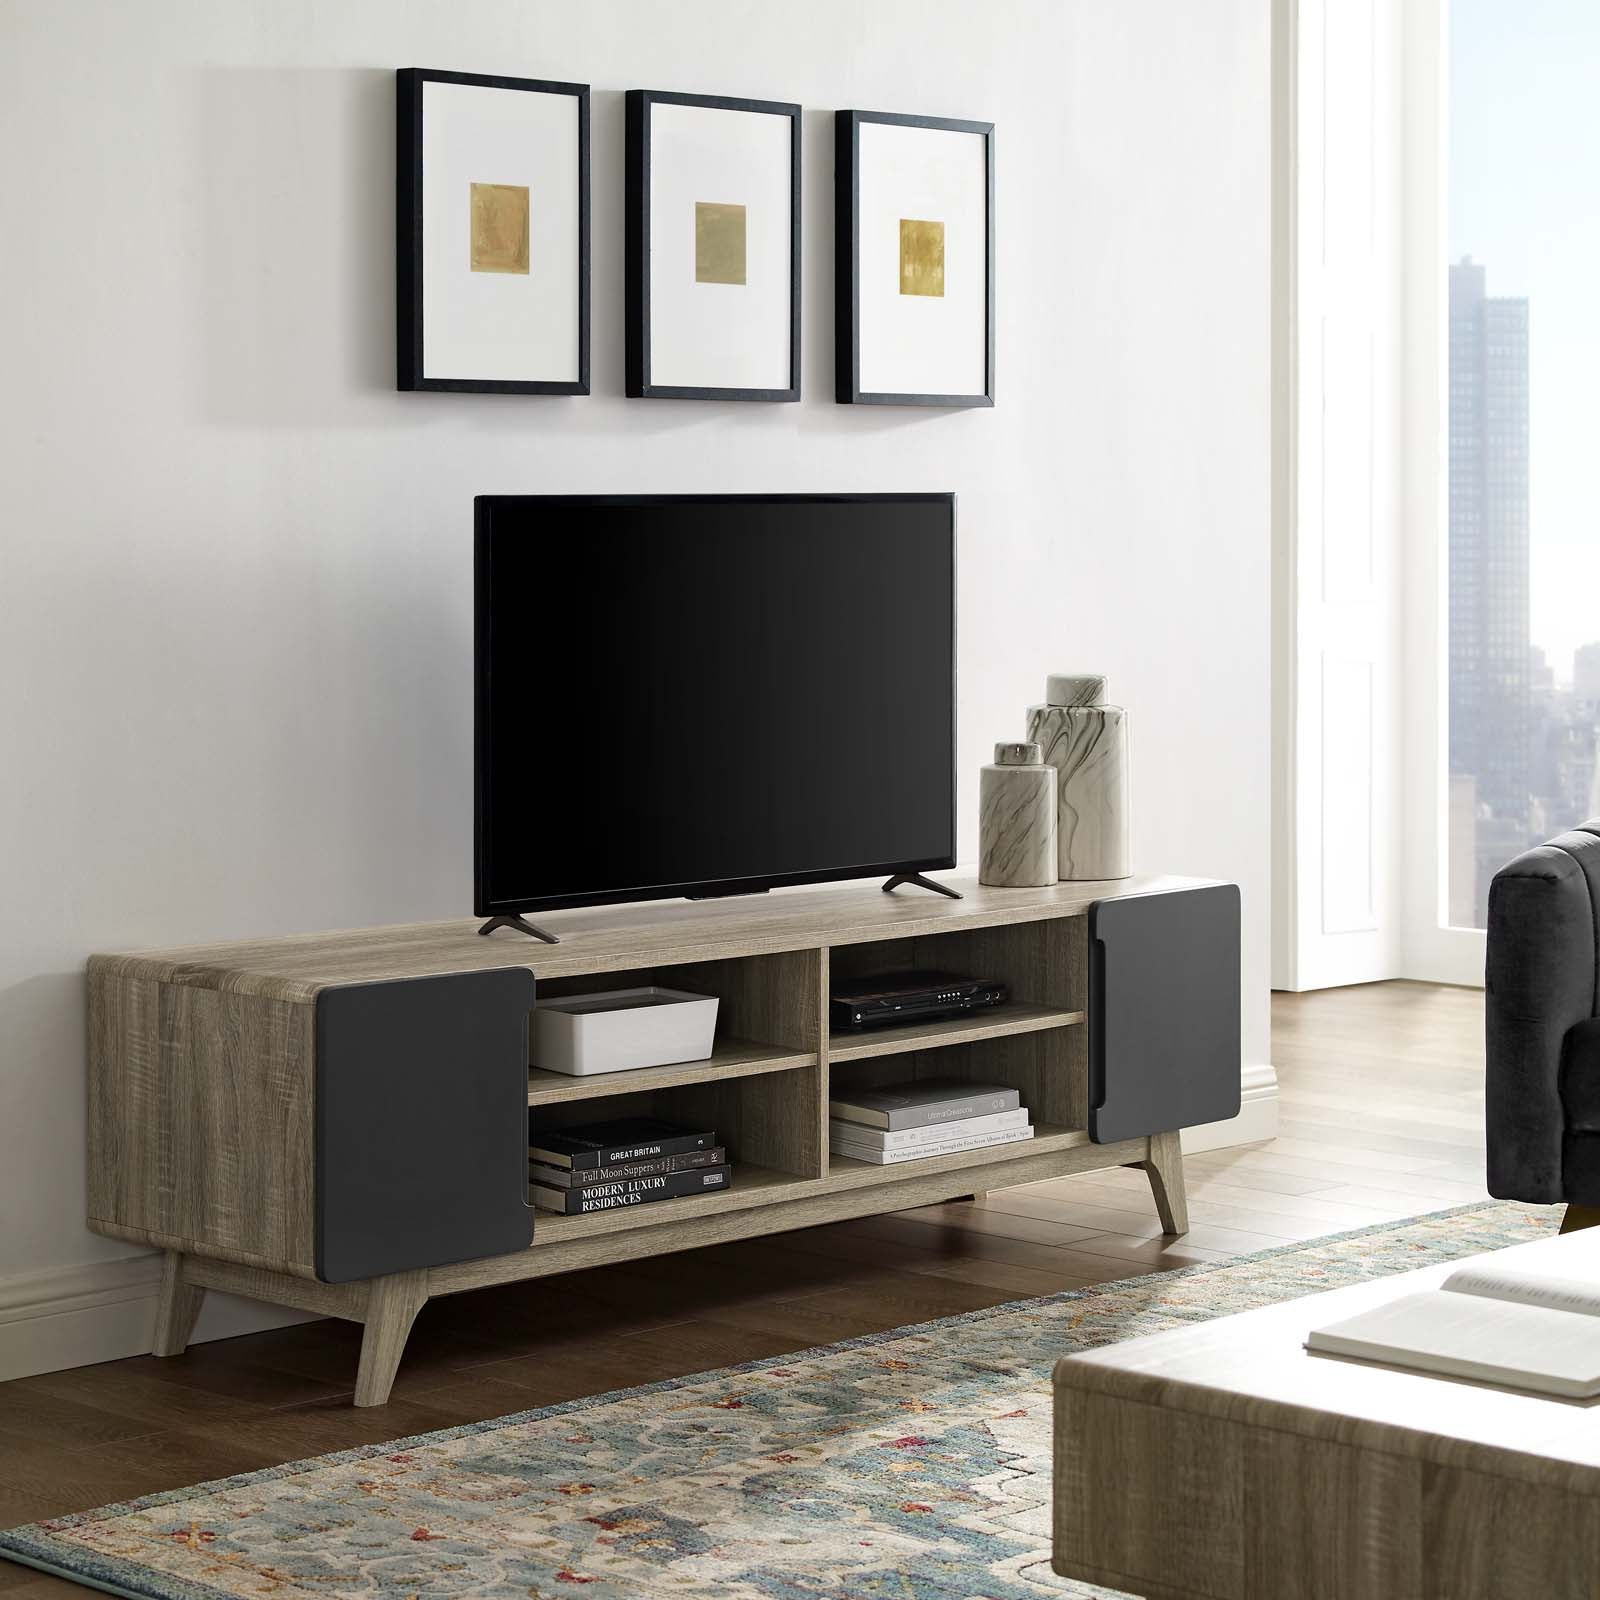 Tread 70" Media Console TV Stand - East Shore Modern Home Furnishings